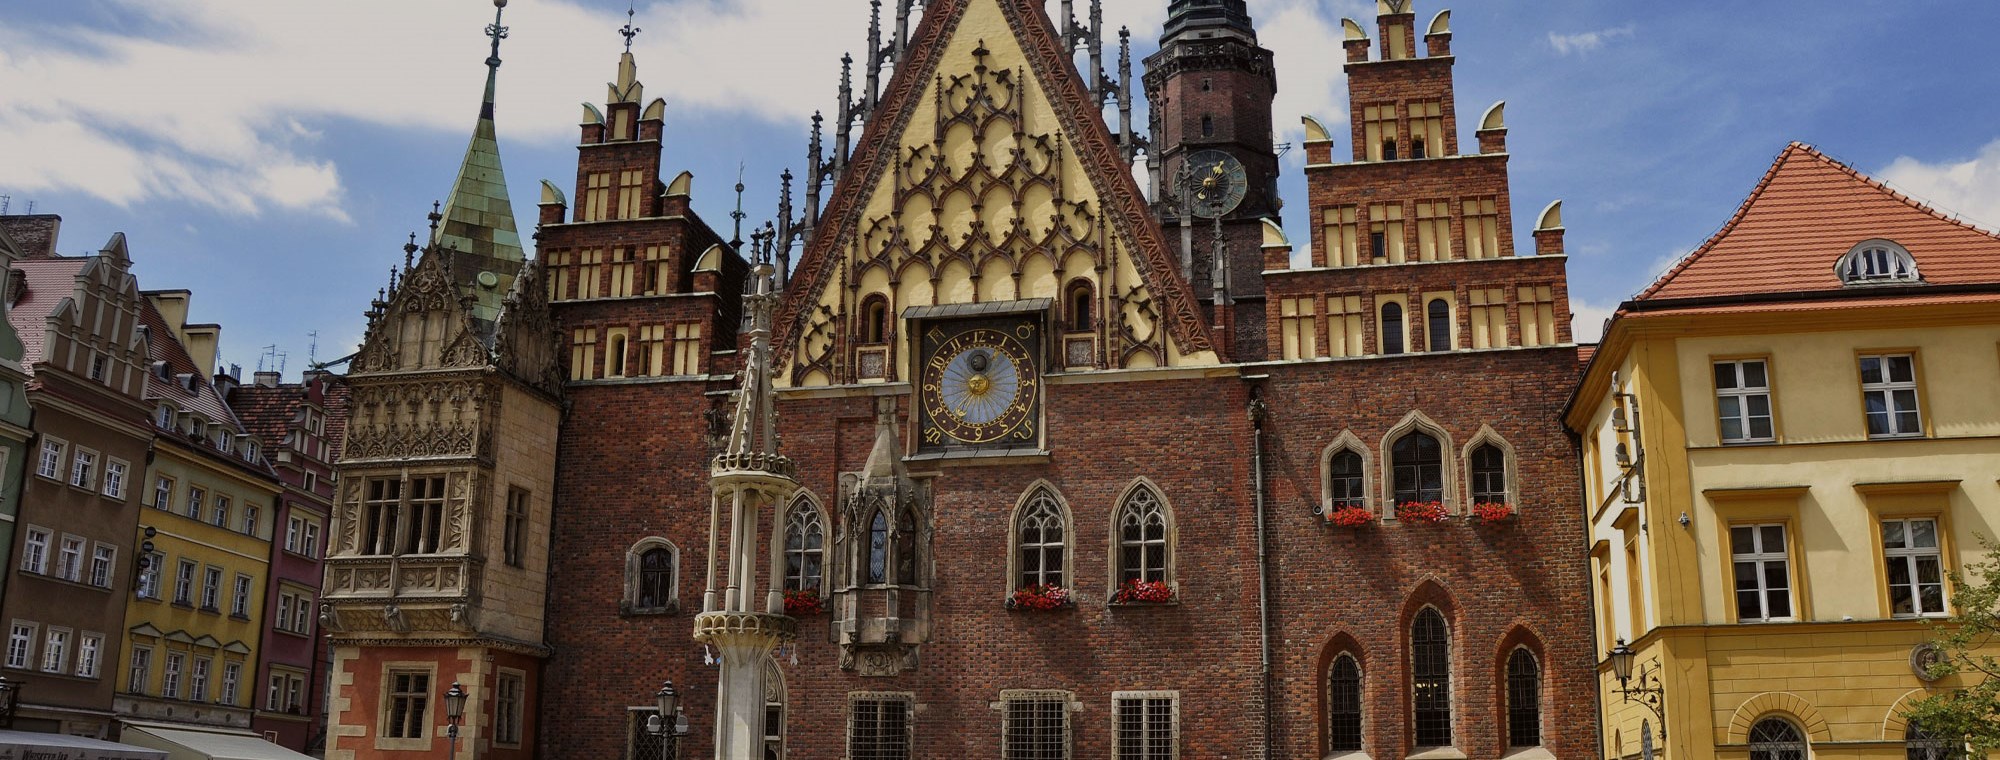 Poland tours of Town Hall clock, Wroclaw